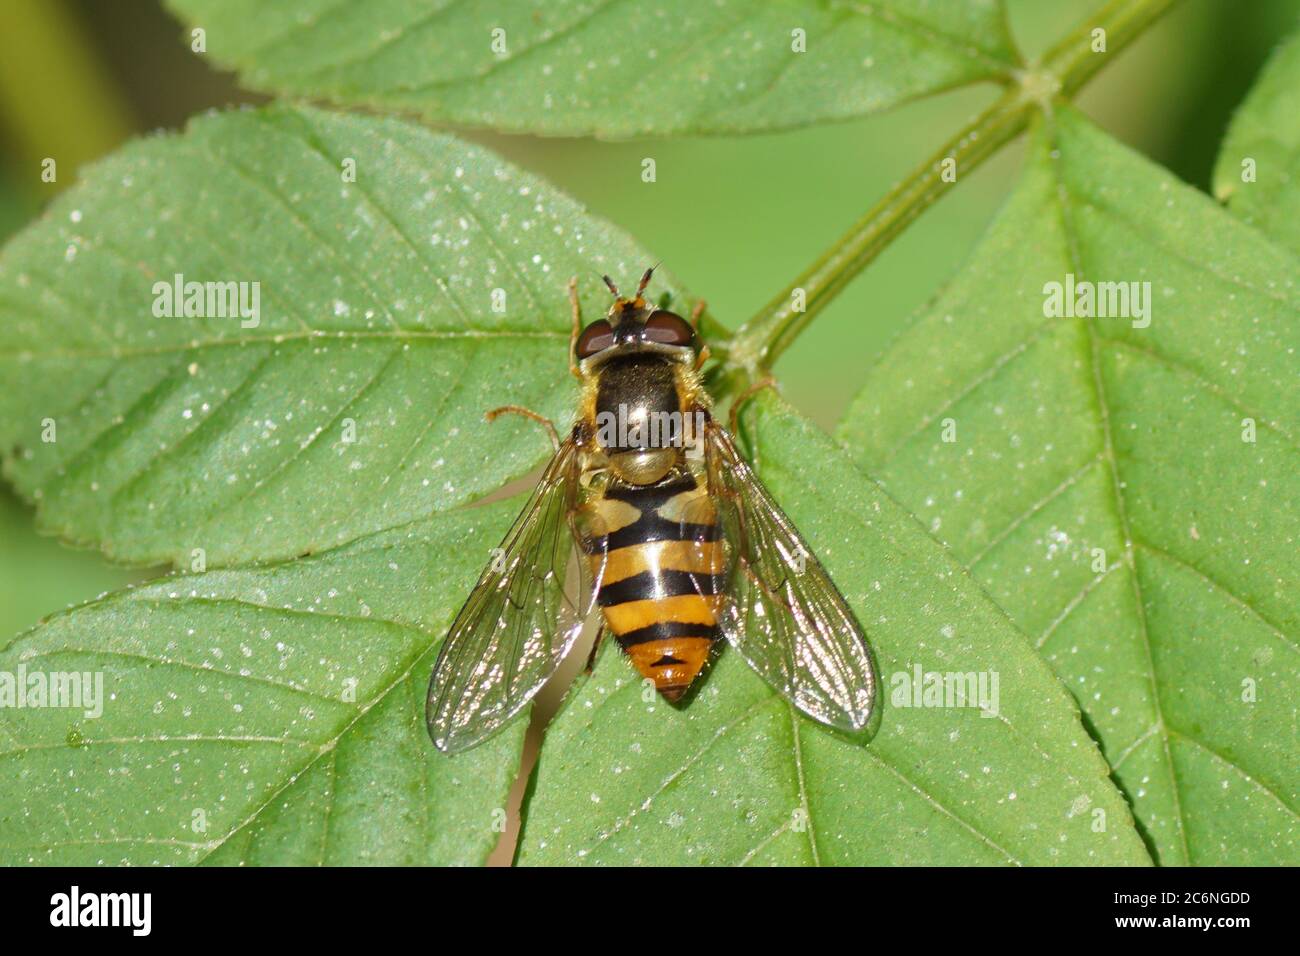 Female hoverfly Epistrophe melanostoma of the family Syrphidae on the leaf of an ash (Fraxinus excelsior). Spring, Bergen, Netherlands April Stock Photo